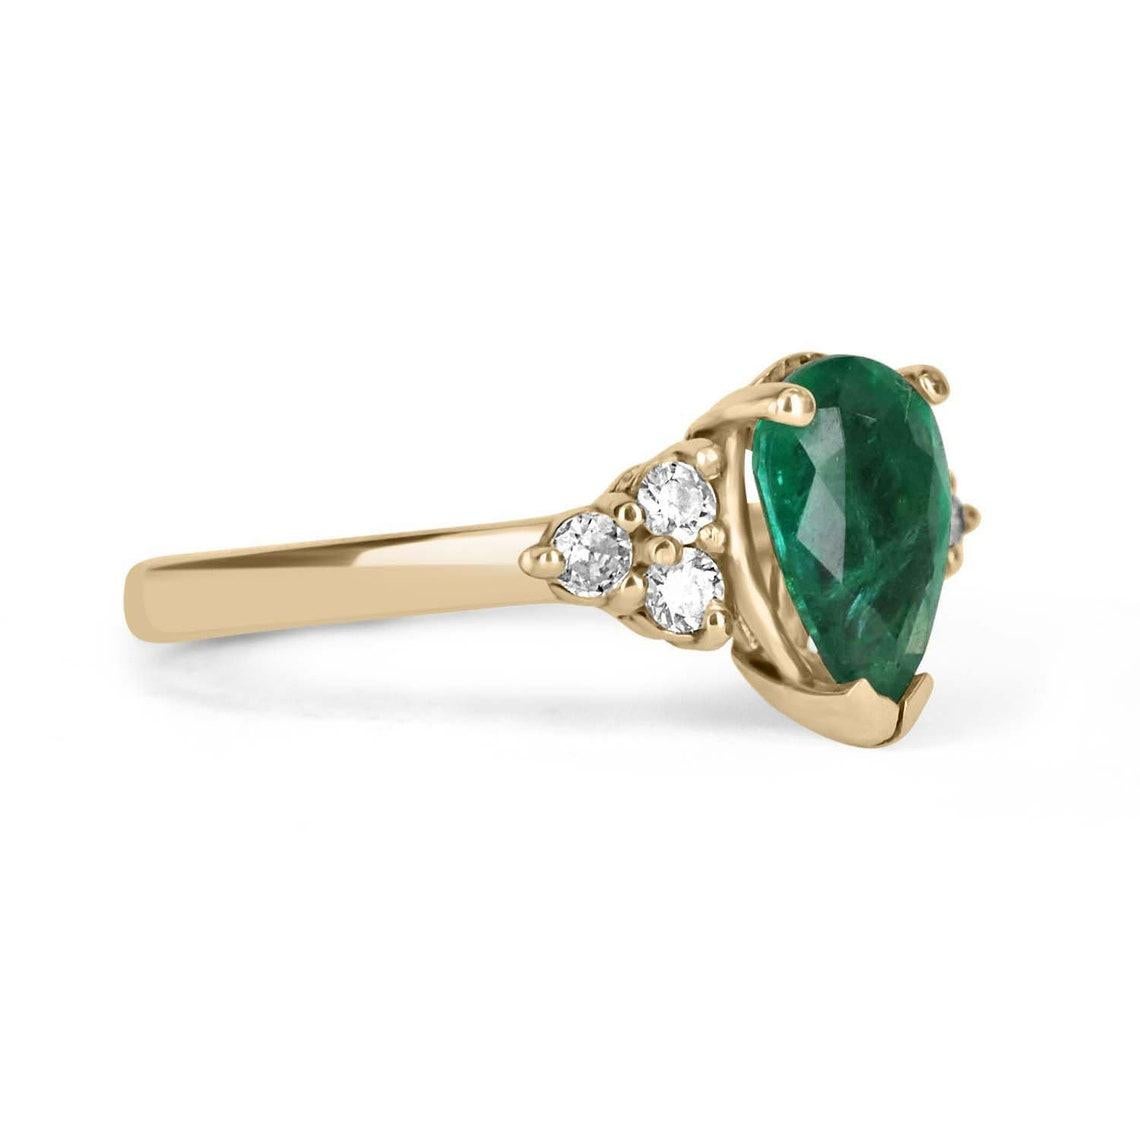 A pear emerald and diamond 14K ring. Dexterously handcrafted in gleaming solid 14K yellow gold, this ring features a 1.0-carat natural emerald, teardrop set in a secure three-prong setting. This extraordinary emerald has stunning green color, strong